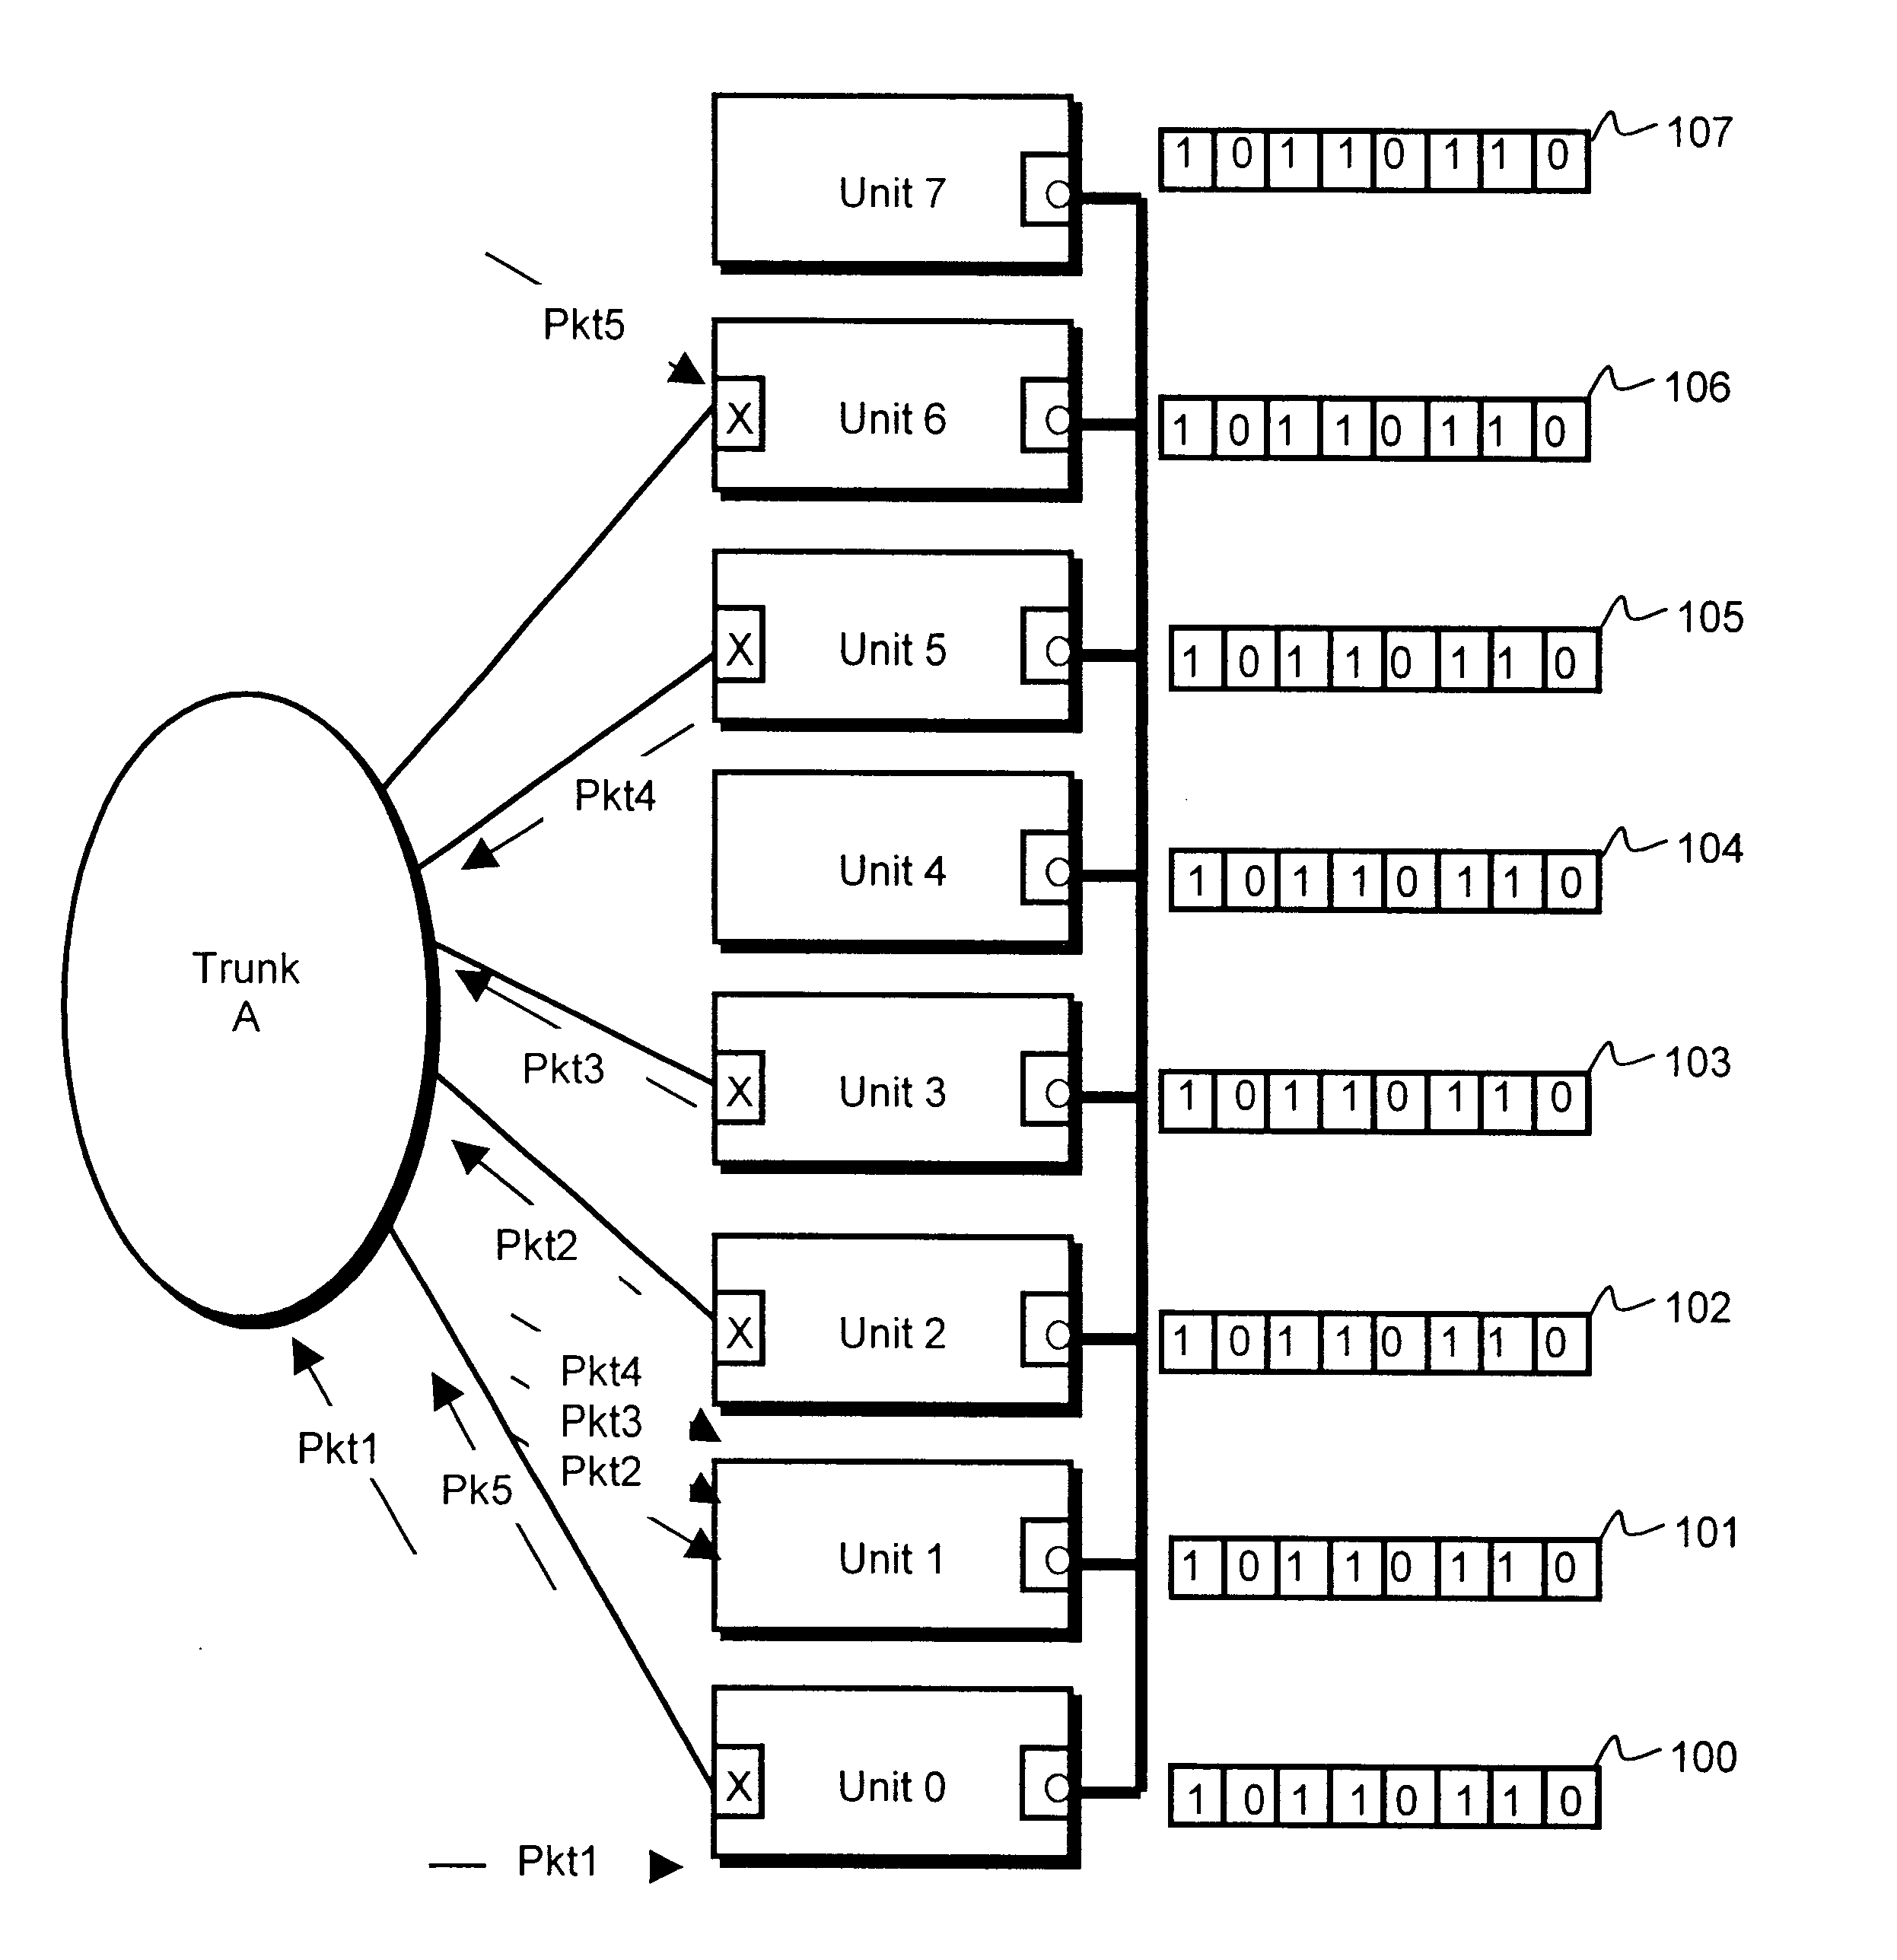 Stackable network unit including register for identifying trunk connection status of stacked units